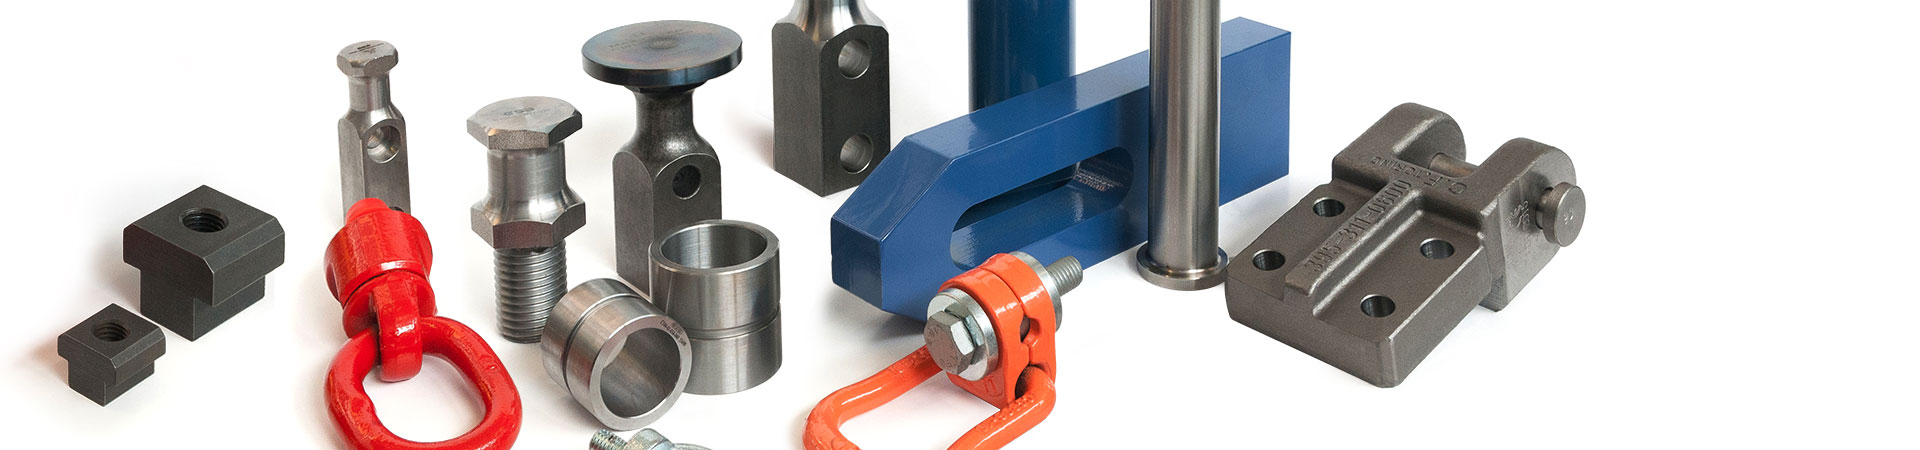 Lifting and clamping devices